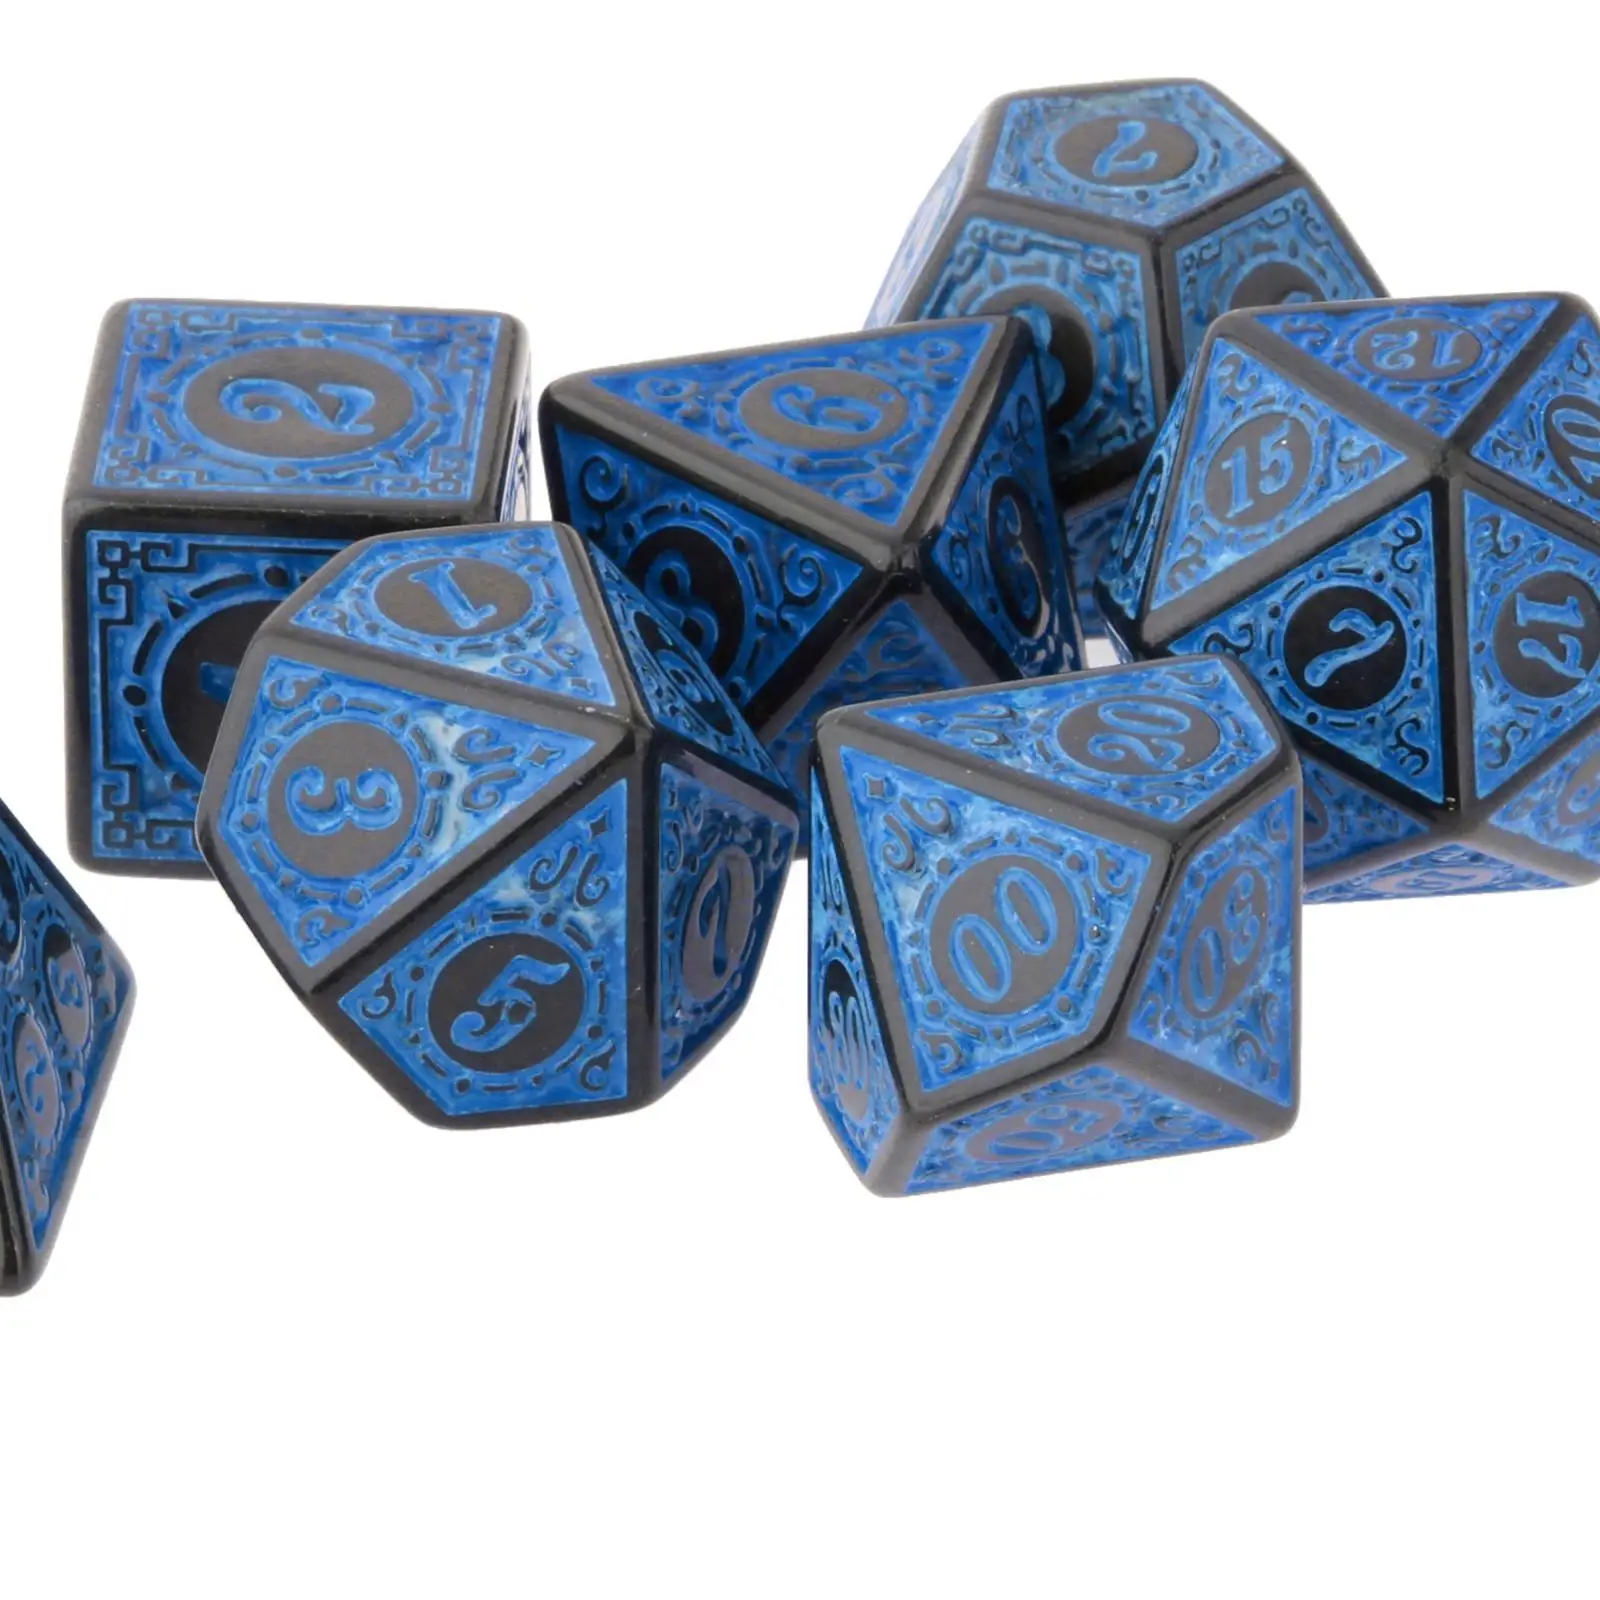 35x Polyhedral  Set with Pouches D for MTG DND Math Teaching Board Game